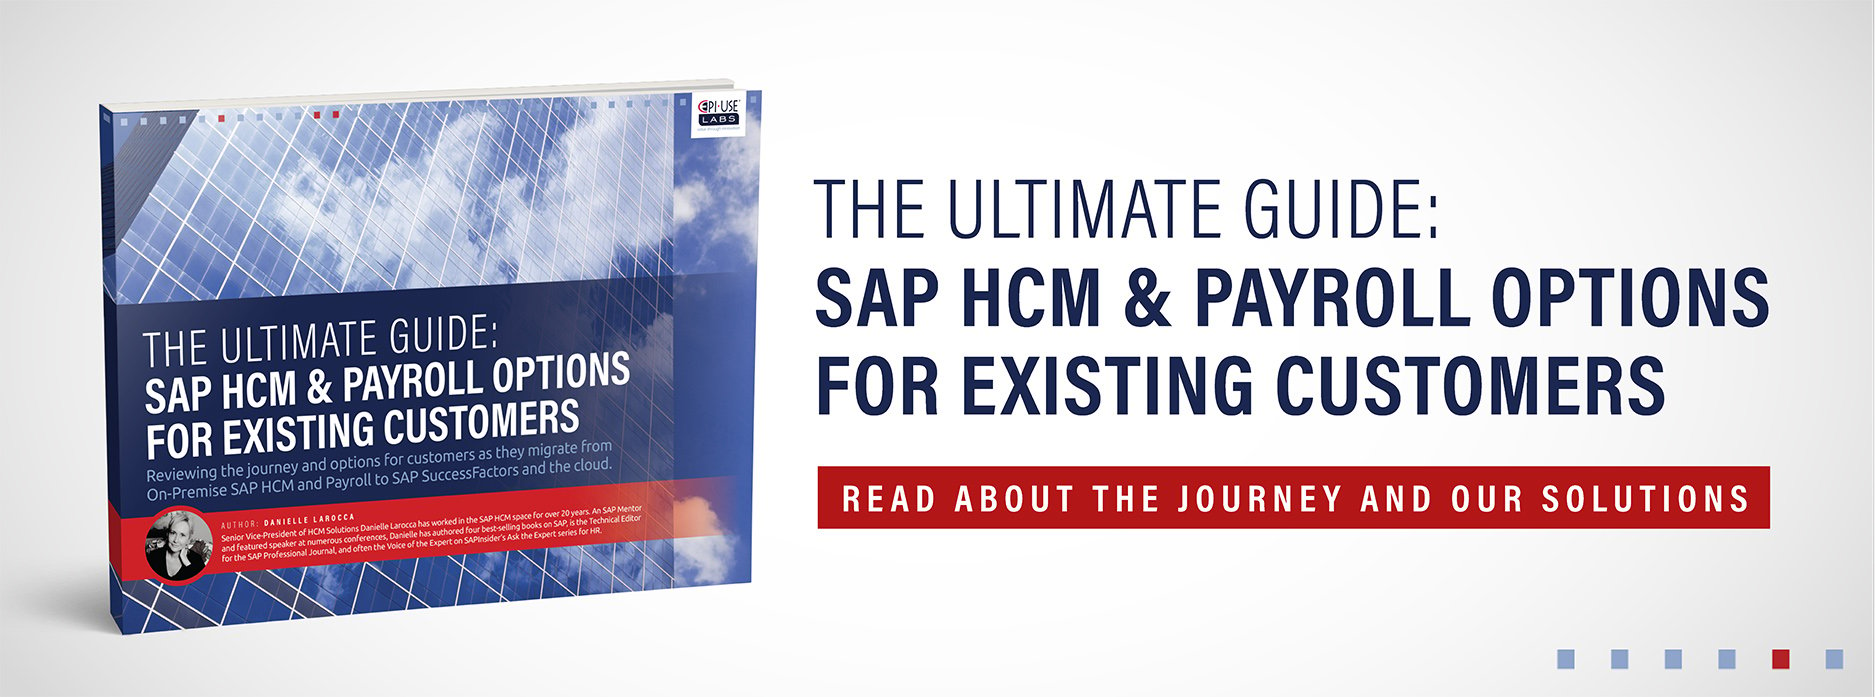 CTA_The Ultimate Guide_SAP HCM and Payroll Options